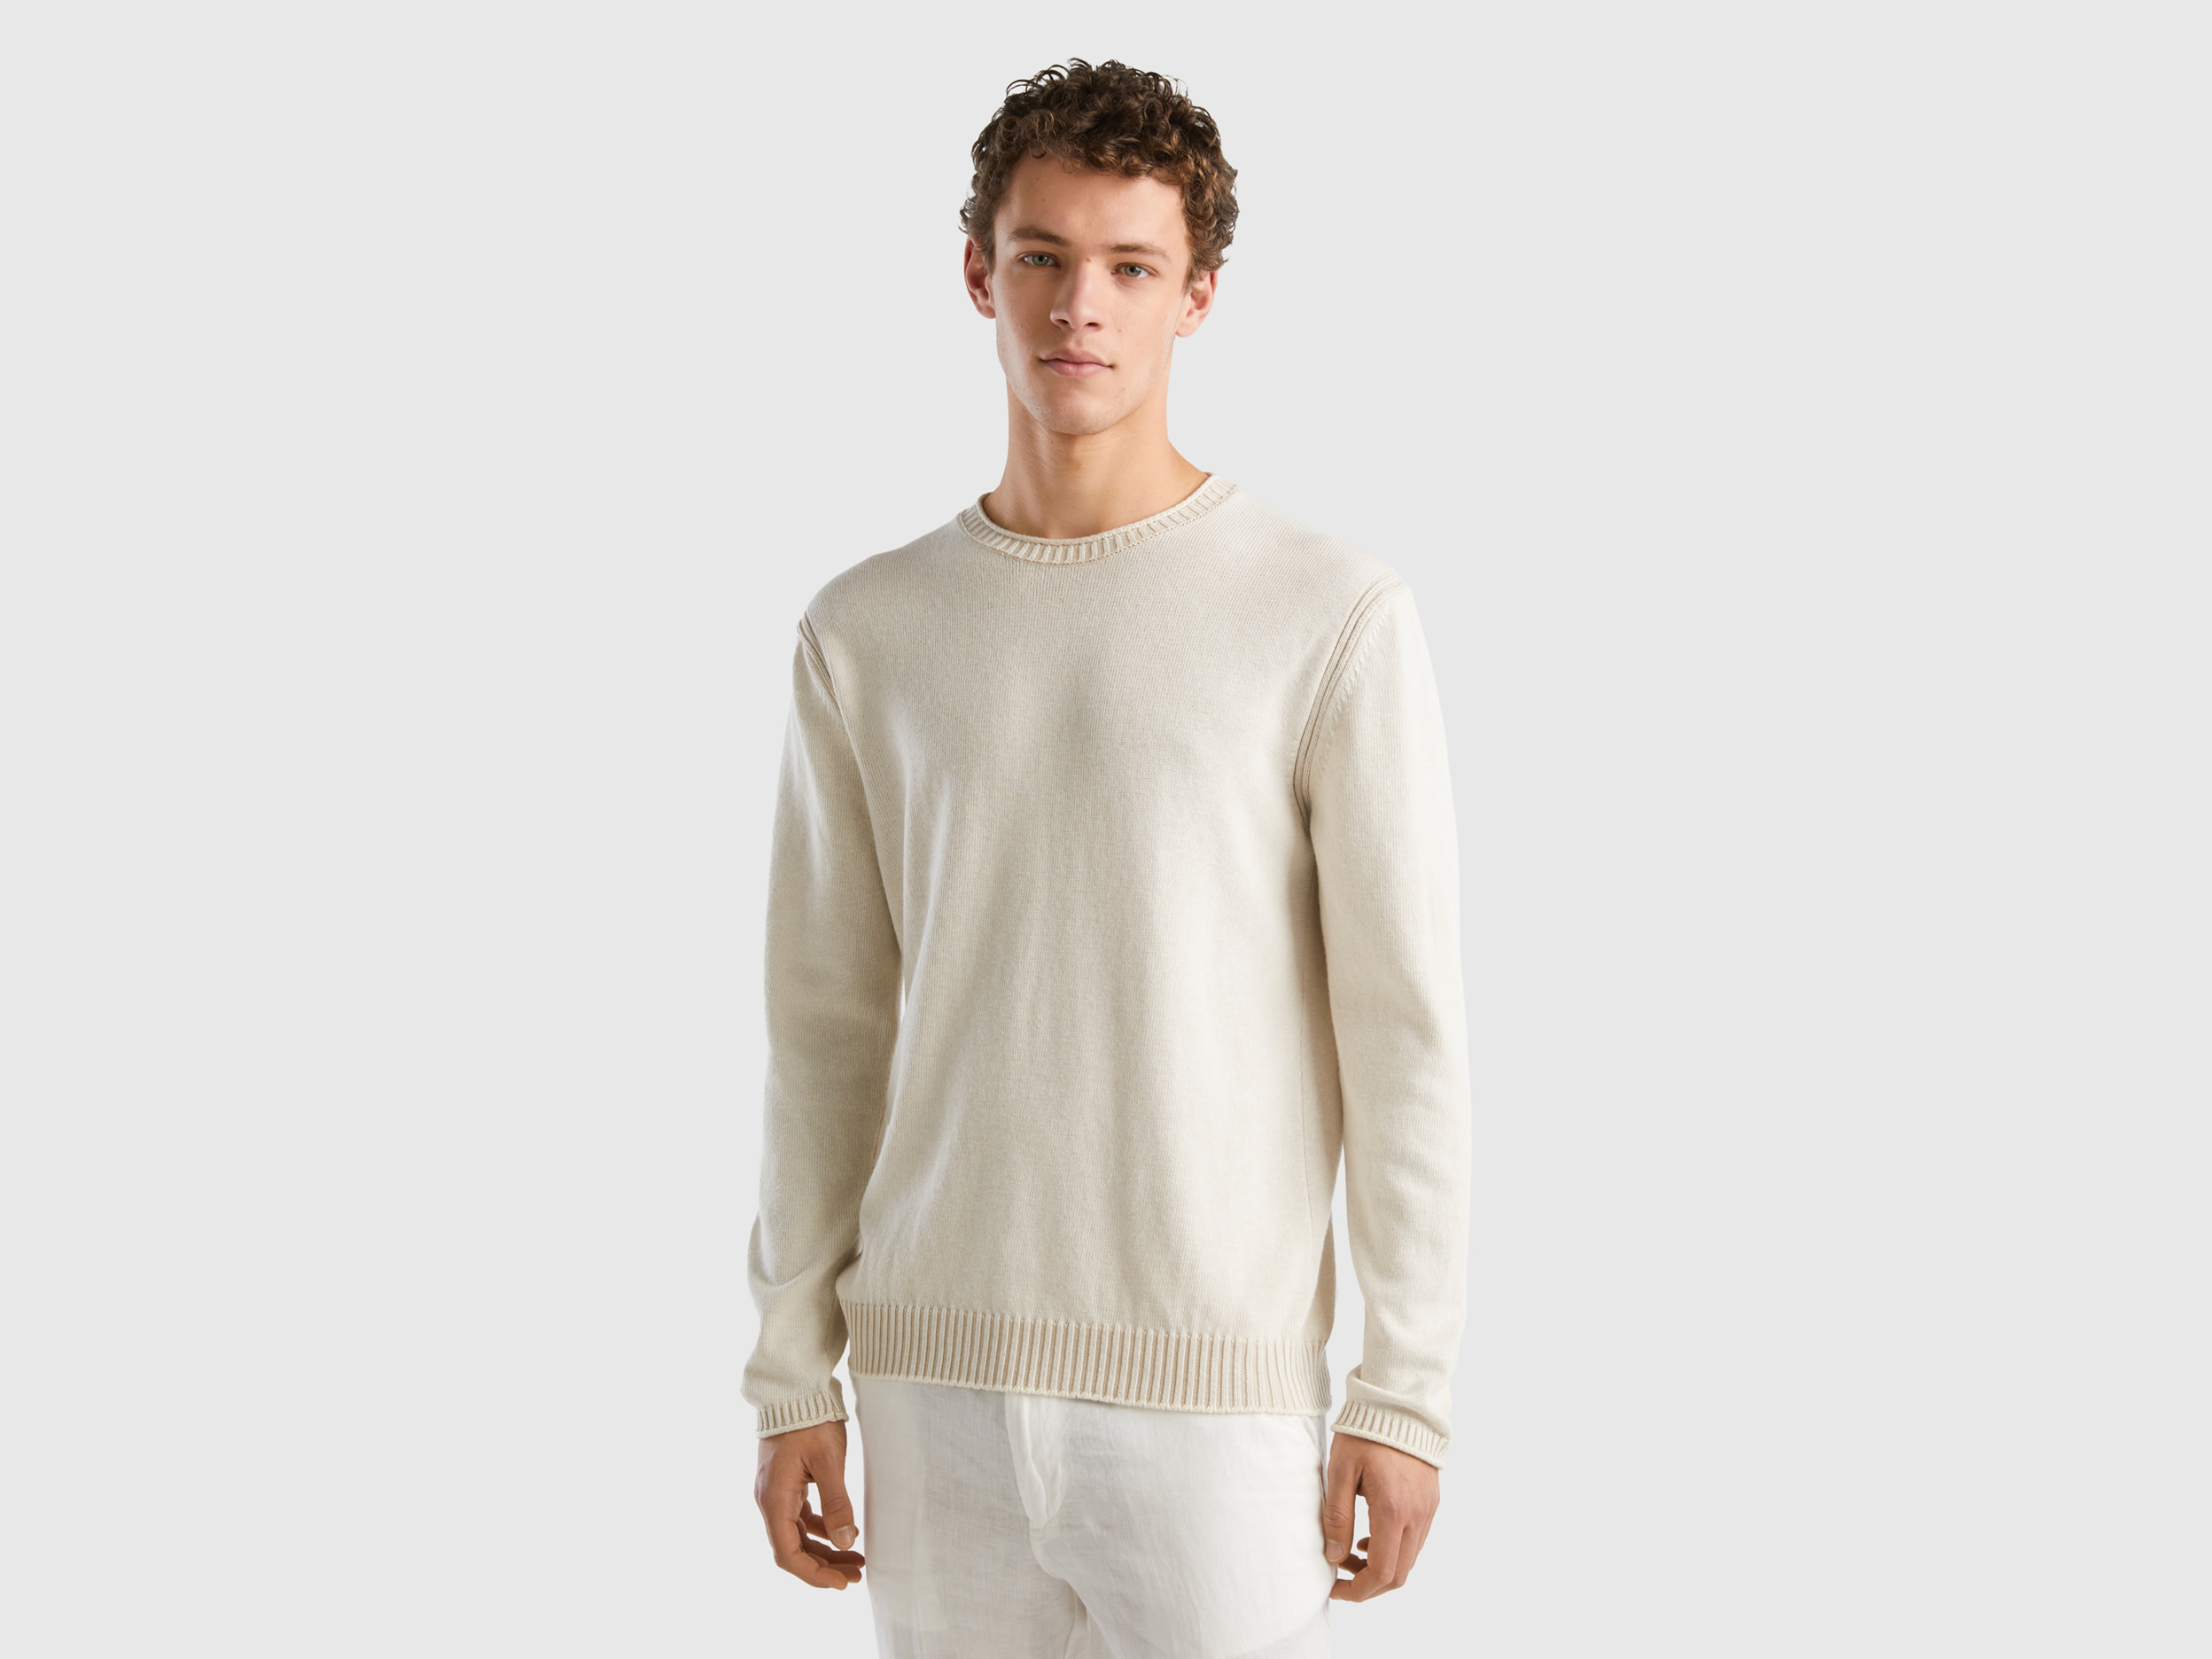 Image of Benetton, Sweater In Recycled Cotton Blend, size XL, Creamy White, Men